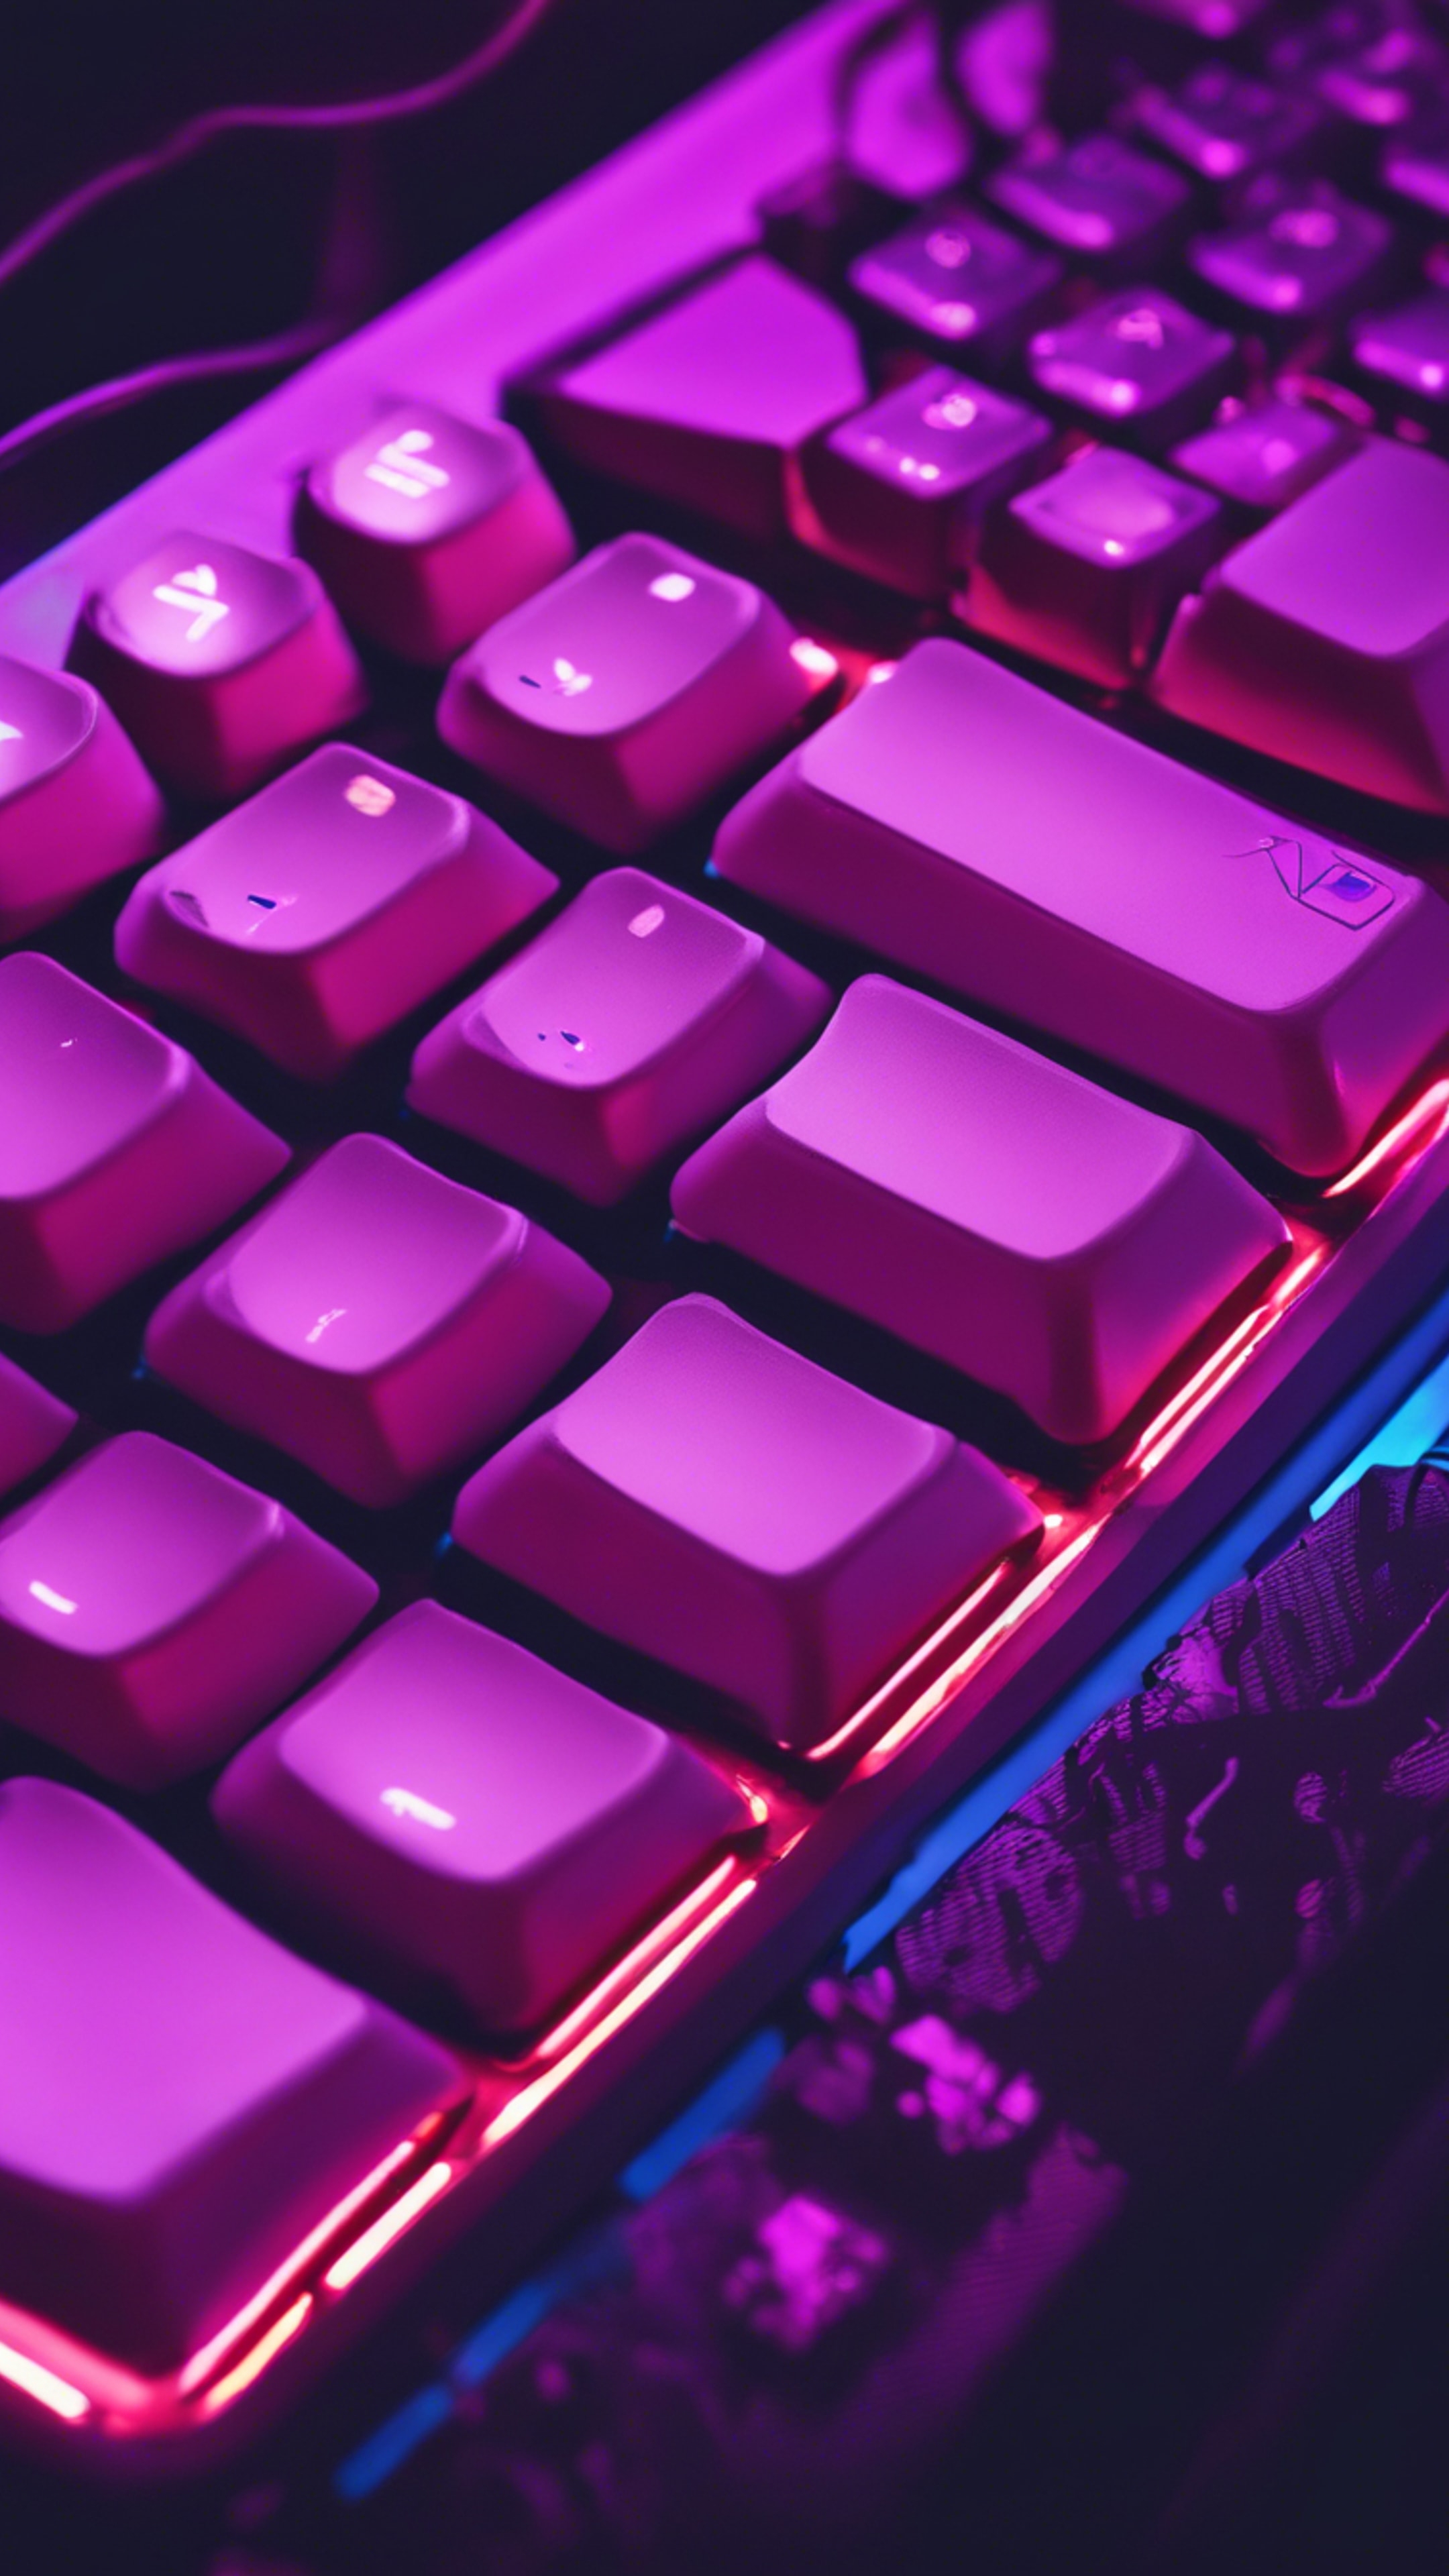 A detailed close-up image of a neon purple backlit gaming keyboard in a dark room. Fond d'écran[fb3f2373aec546b8b630]